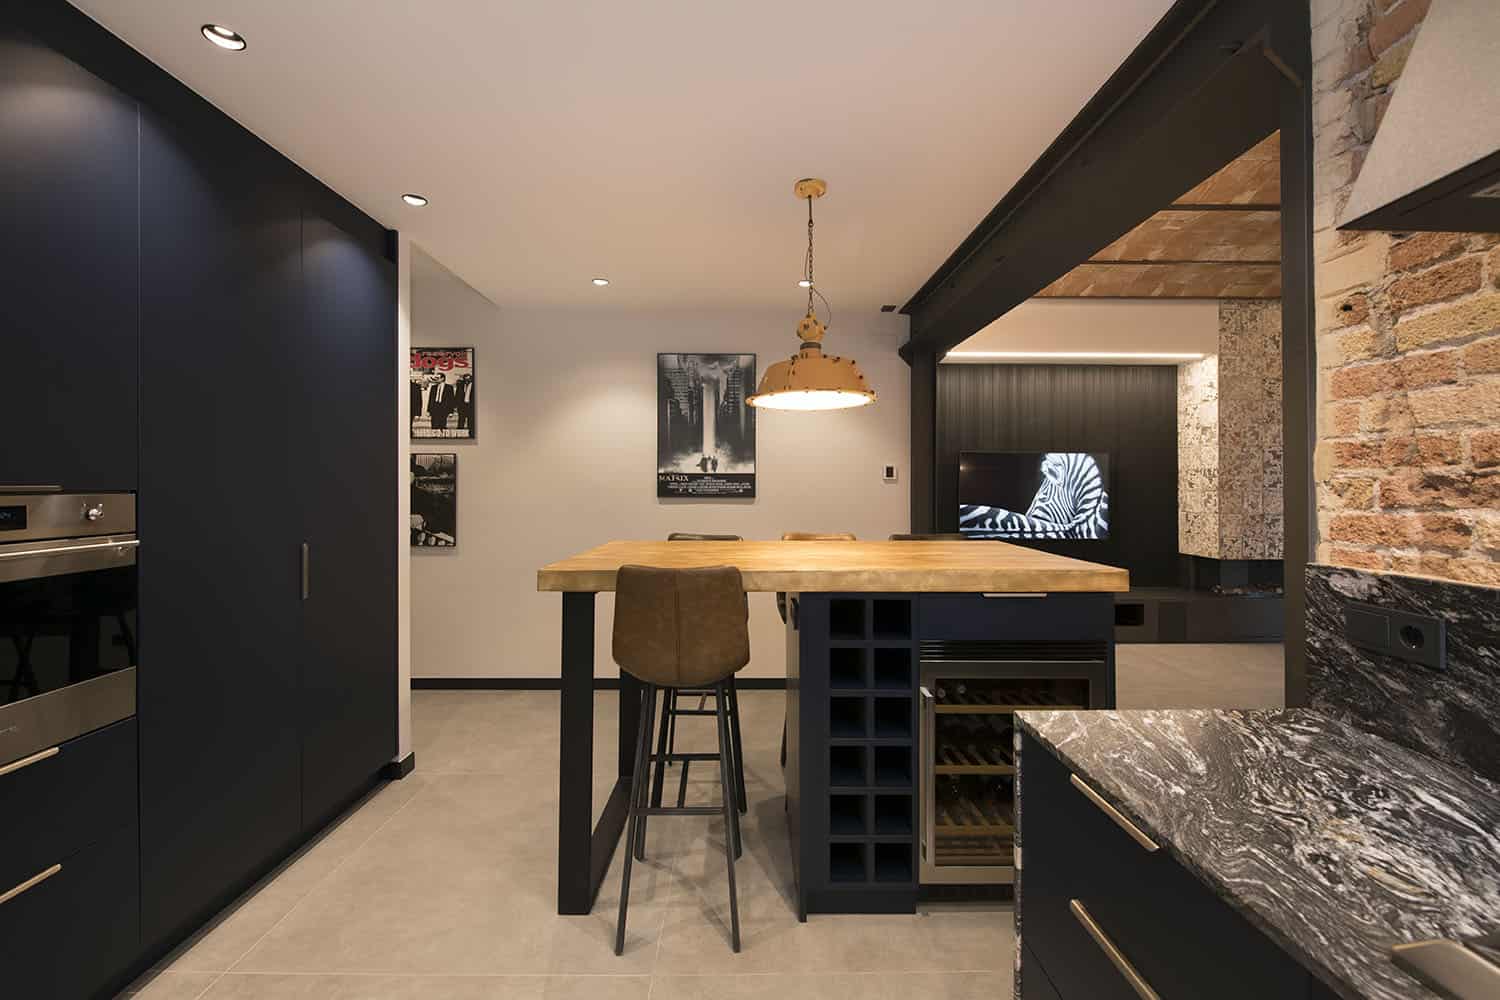 03 The kitchen island features wine storage, light stained butcherblock countertop and tall leather stools